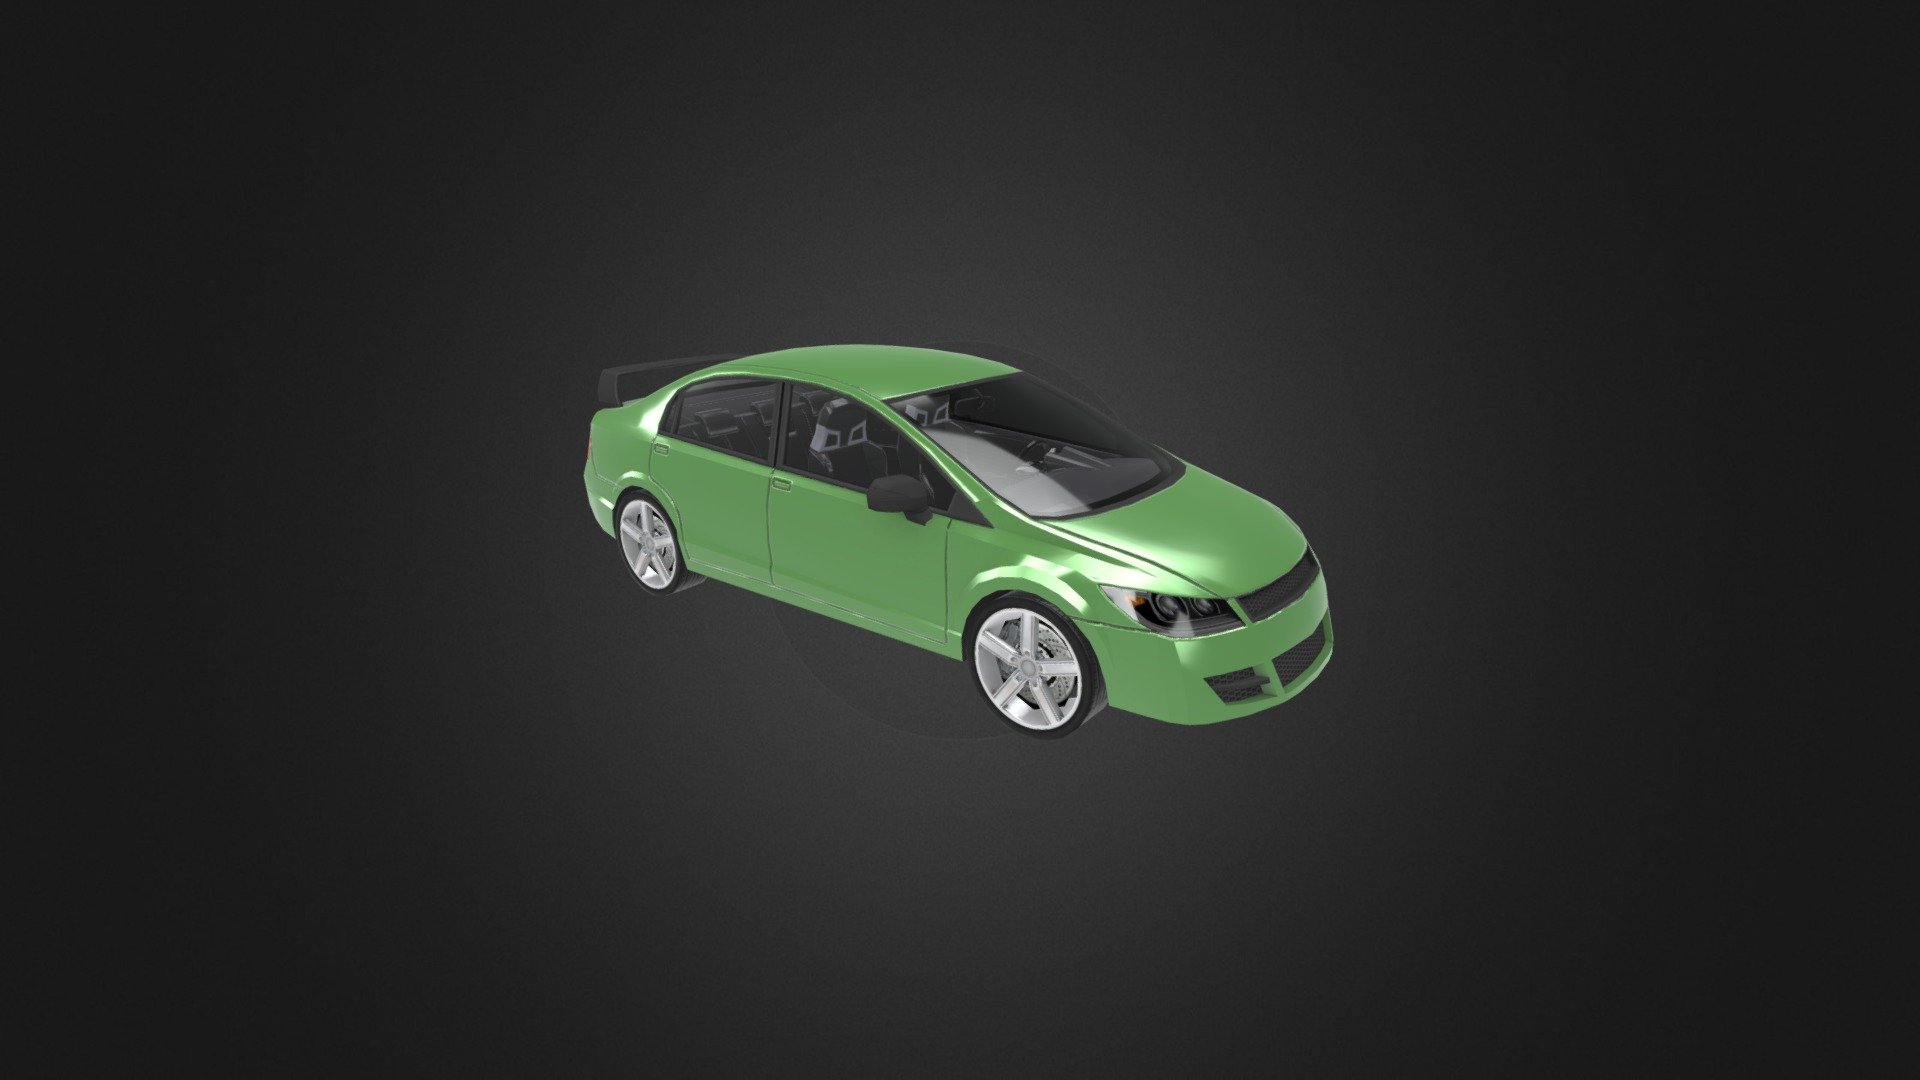 A low poly amazing race car that can be used for any type of projects.
Model has detailed realistic textures 1024x1024 and 2048x2048. Includes diffuse, normal and specular mapped 3d model